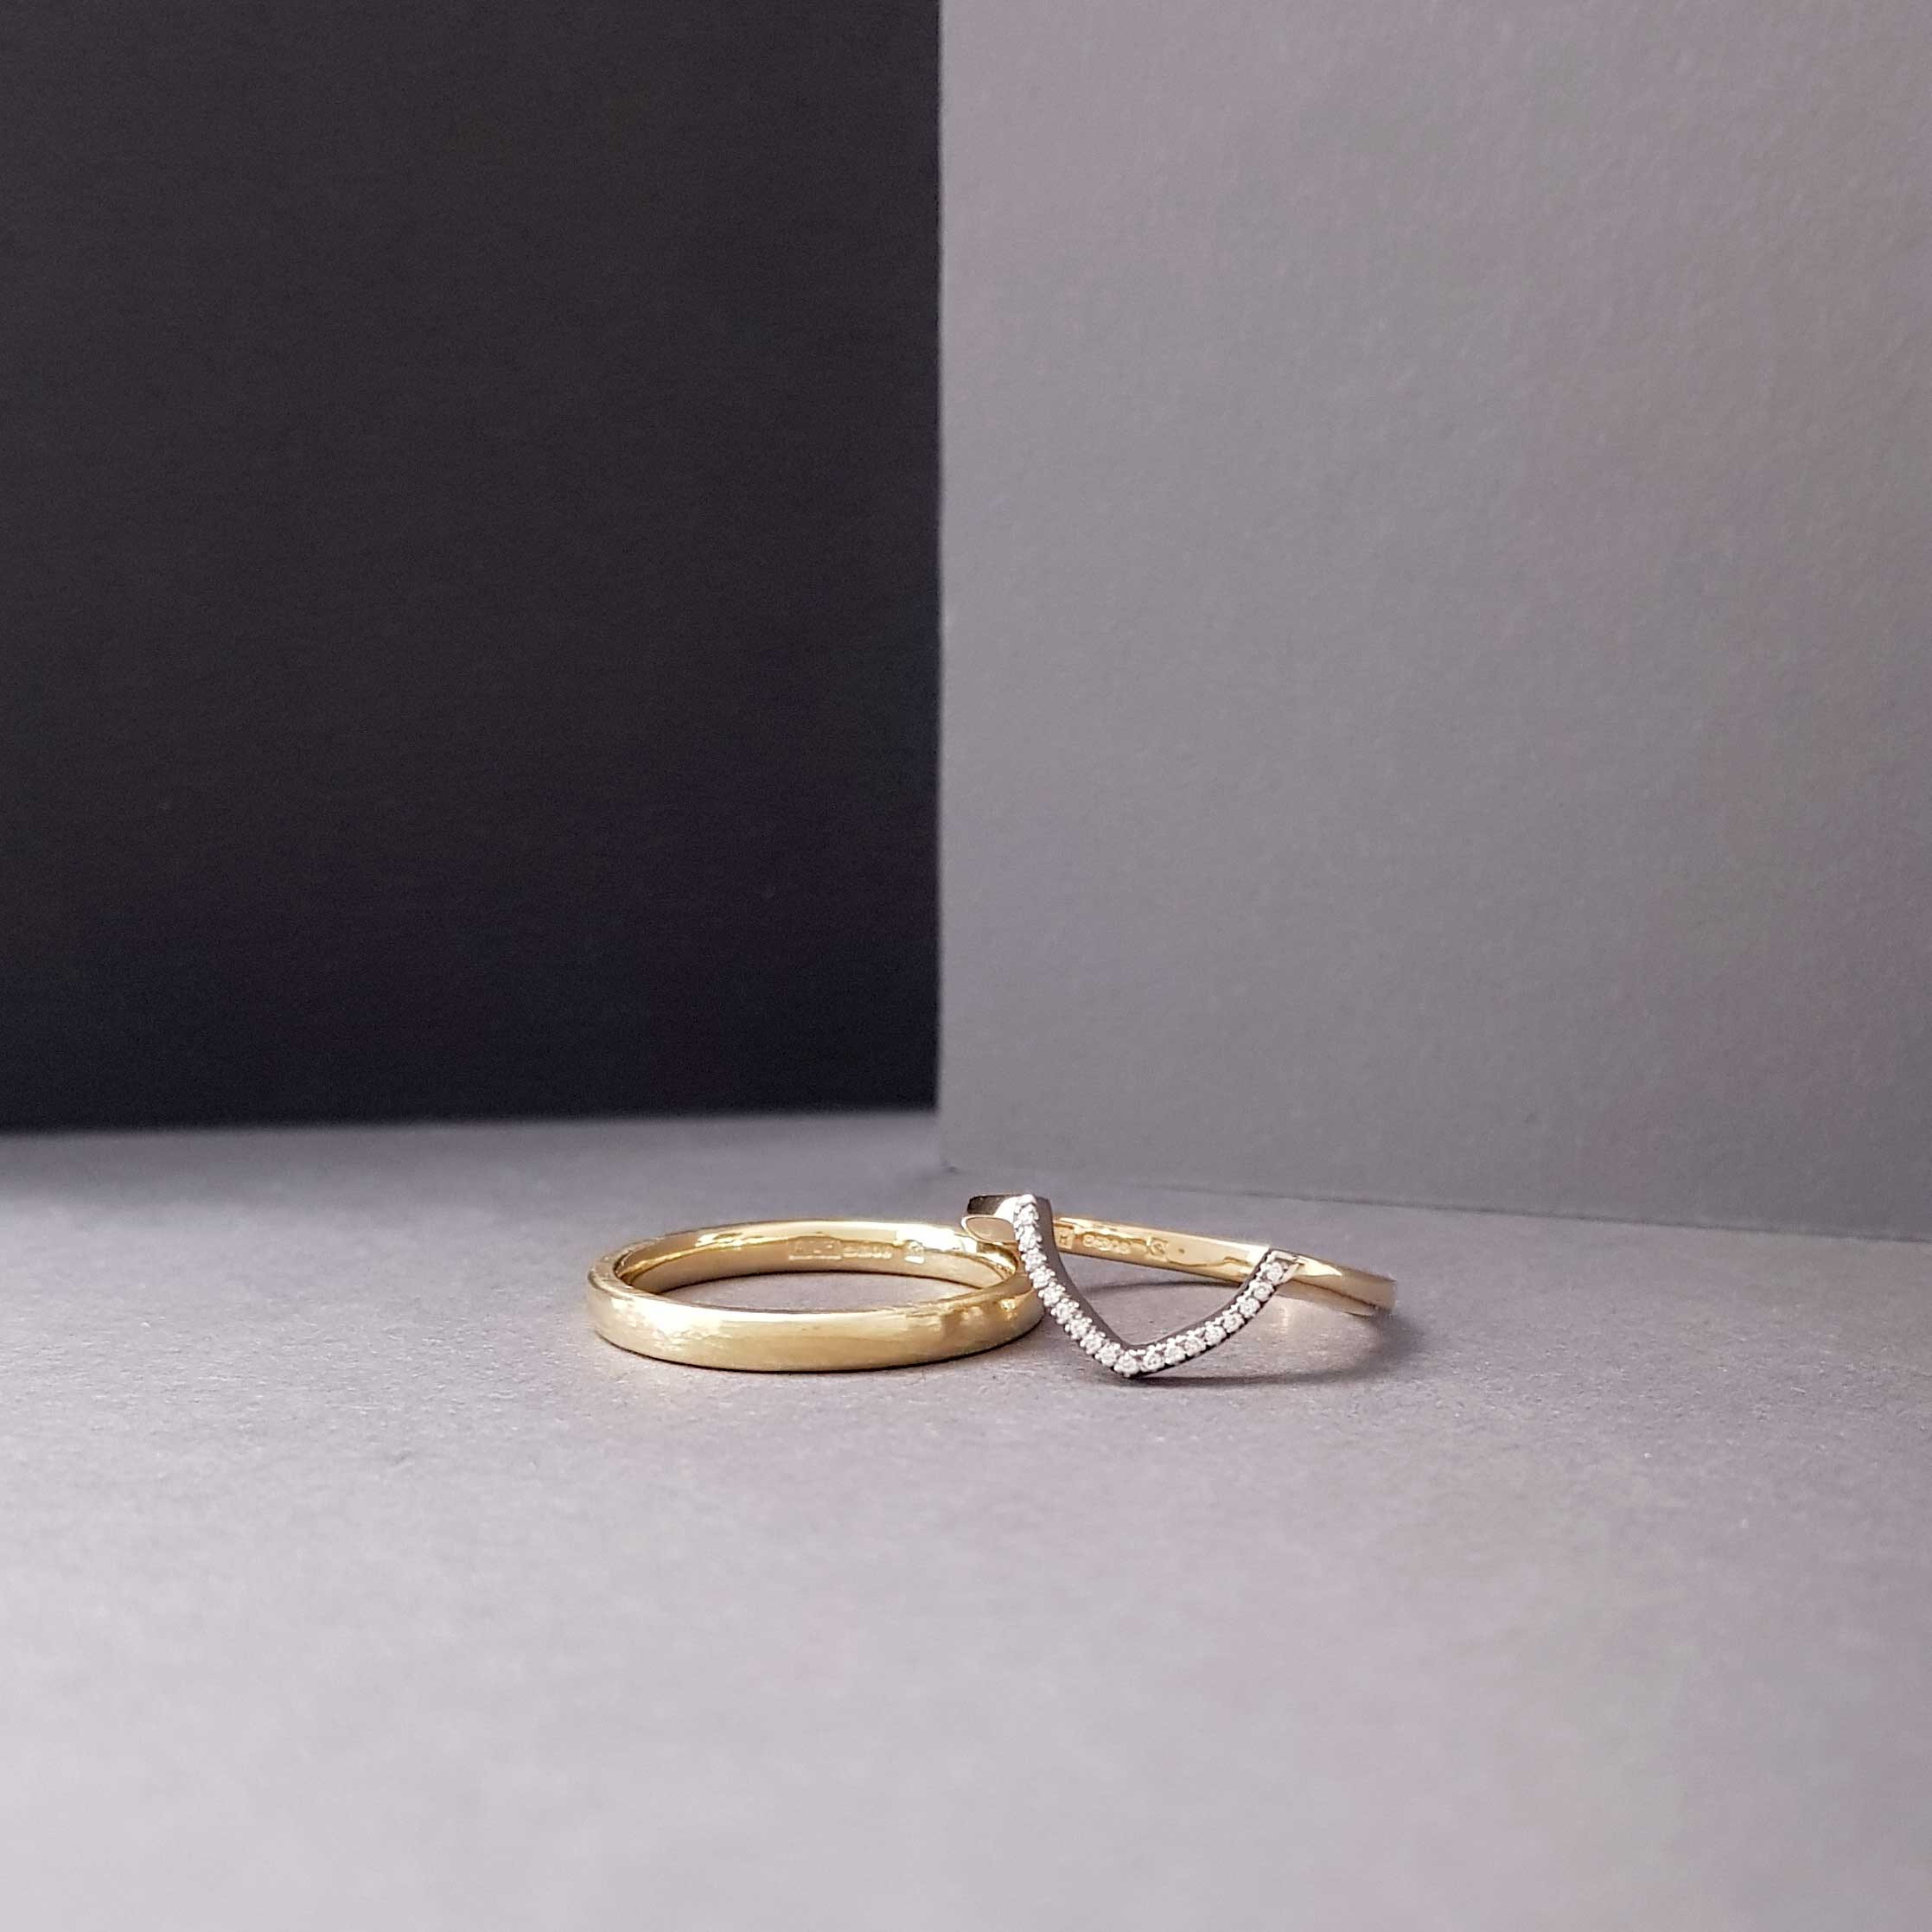 Bespoke Fairtrade Gold wishbone ring with a V-shaped detail set with diamonds resting on a man's ring. Both rings are set against a mixed backgound of grey and black with dramatic lighting.